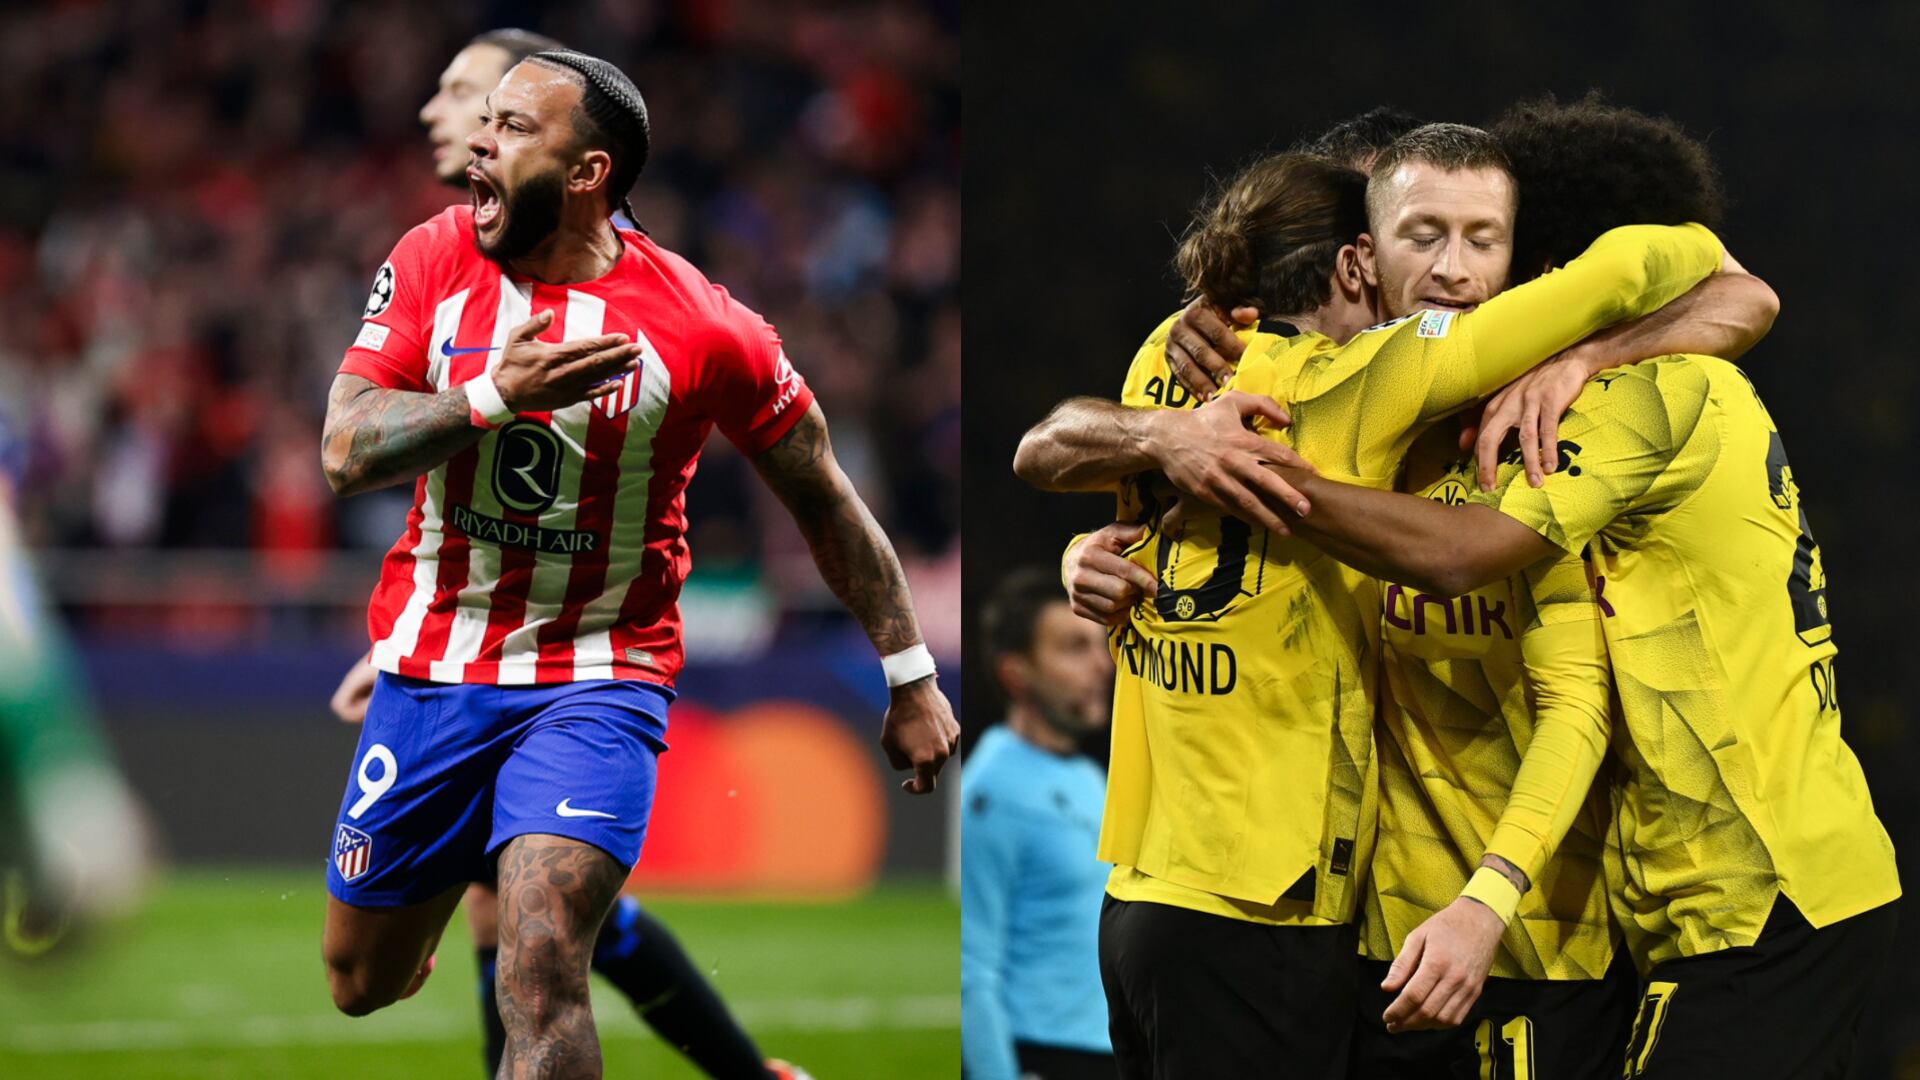 Atletico Madrid and Dortmund advance to the QF, here are all the qualified teams